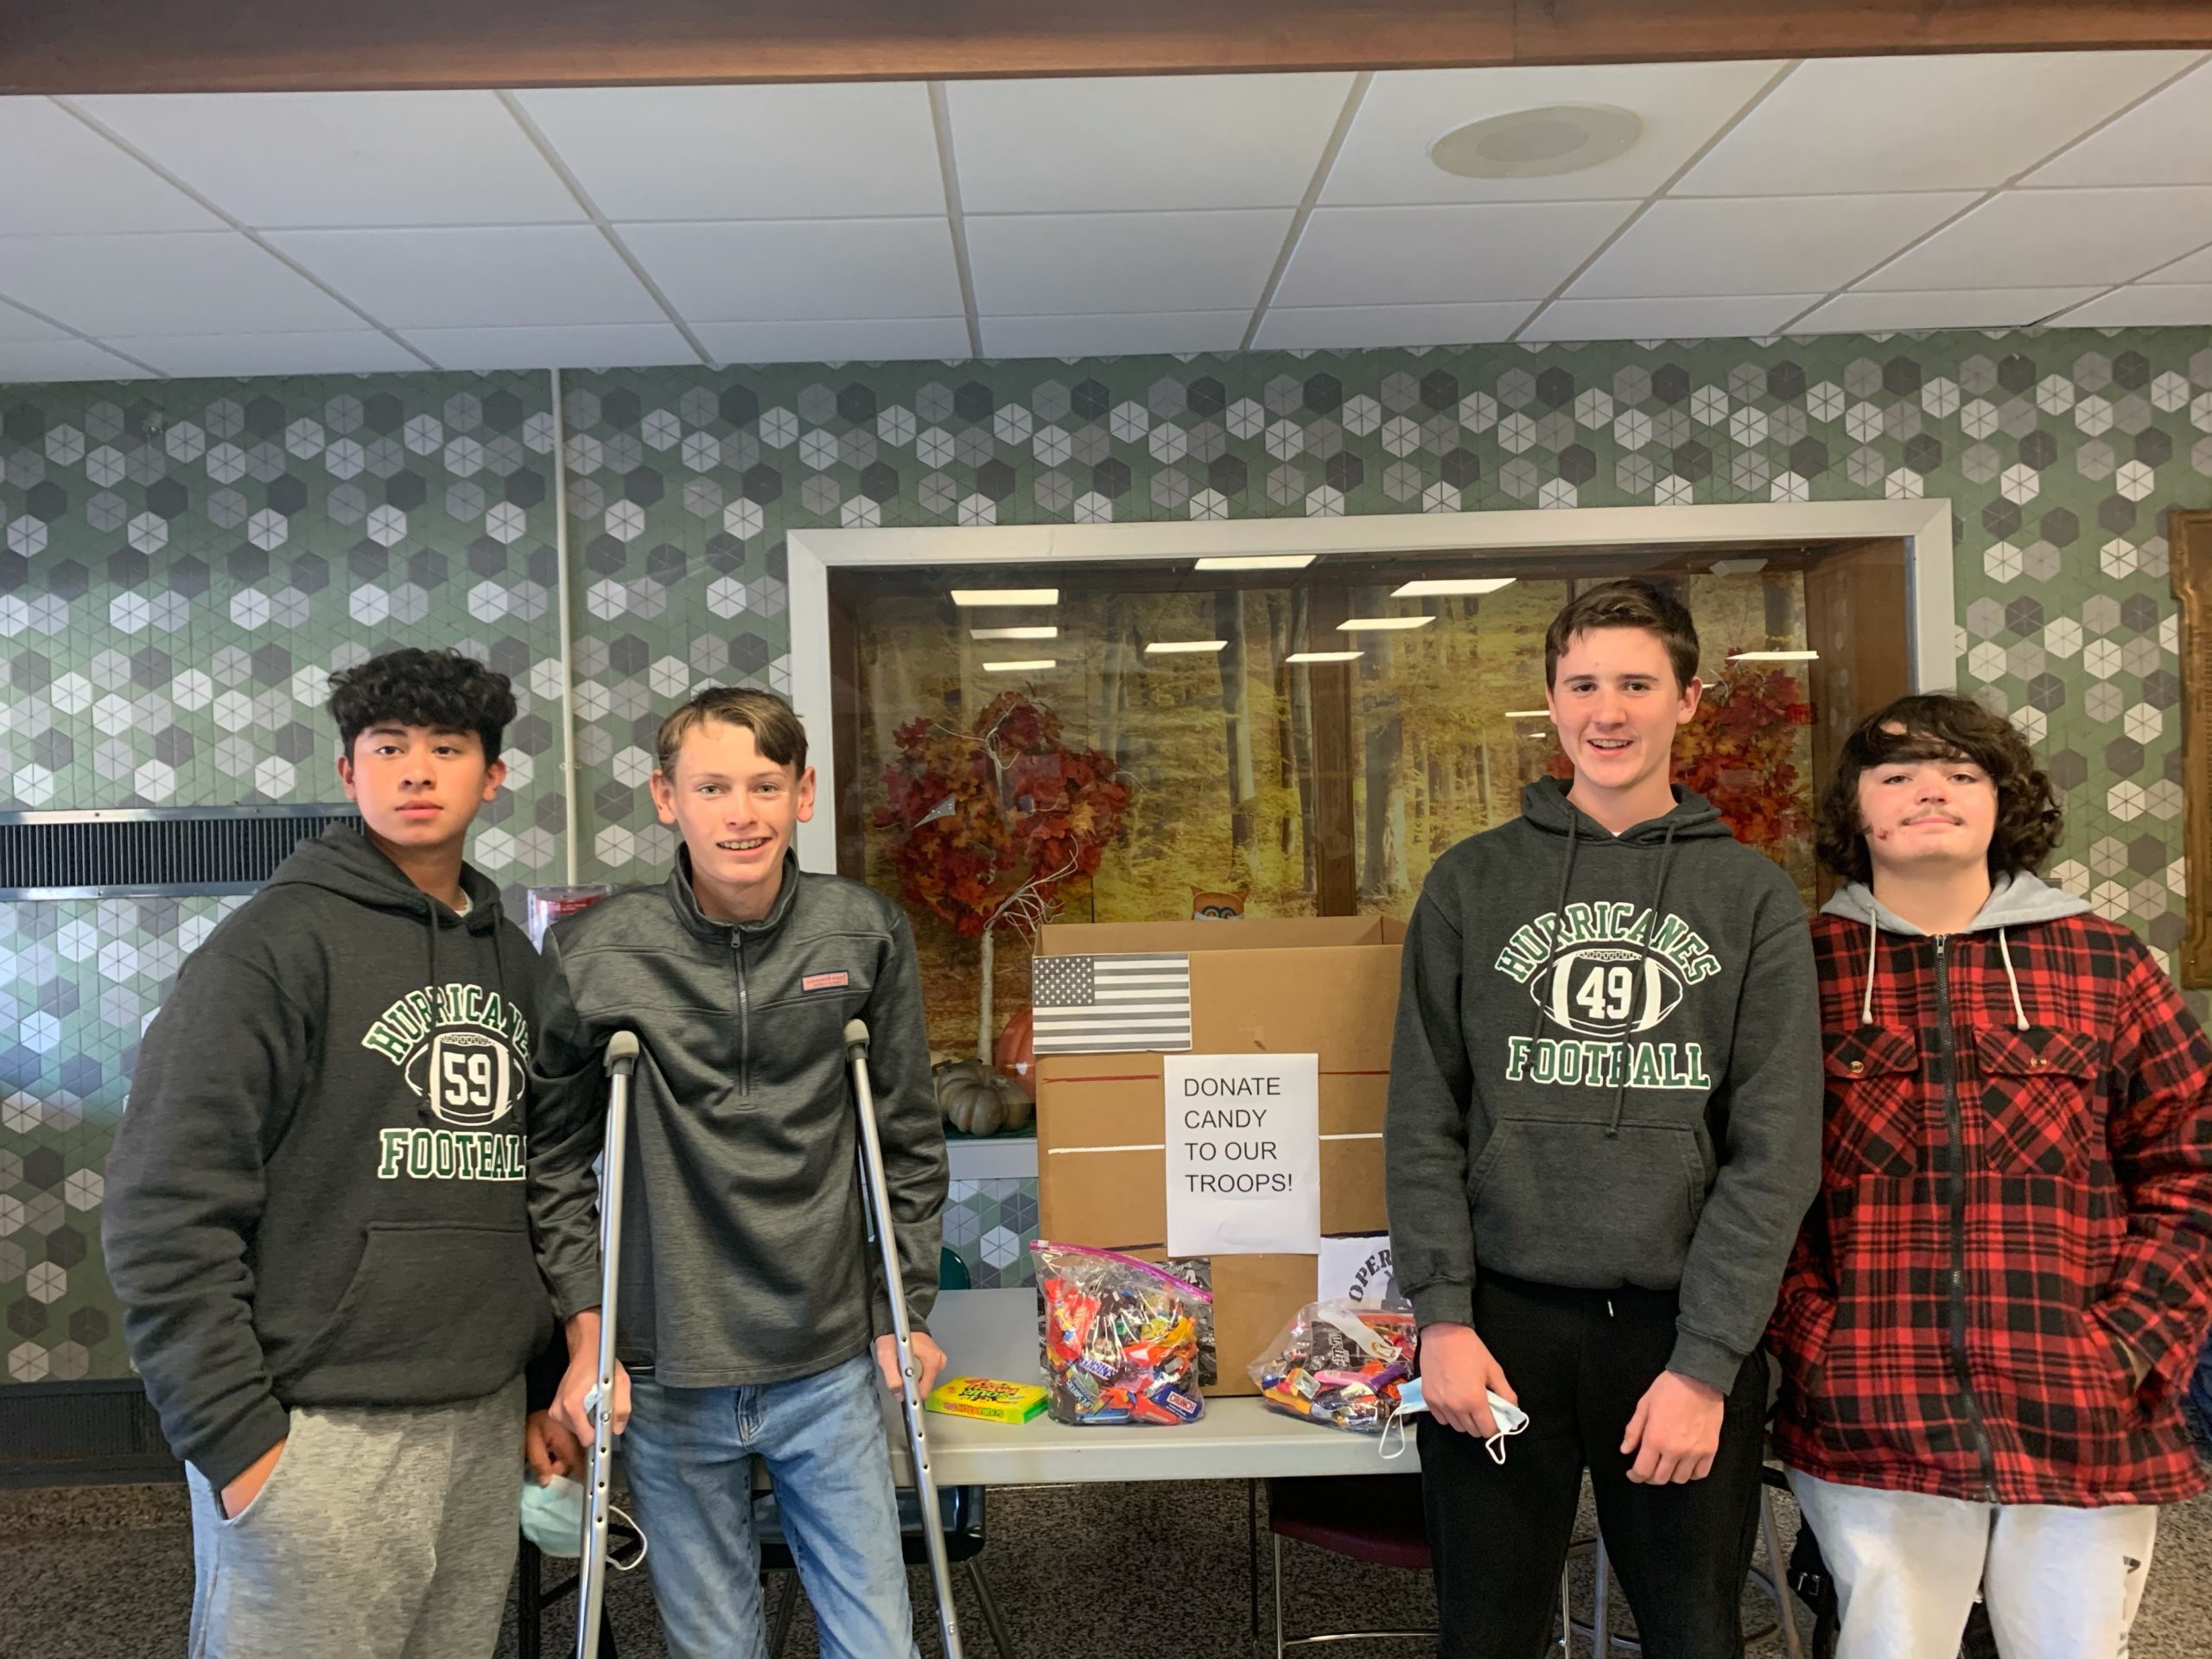 Members of the Westhampton Beach High School ninth grade student government, from left, David Salazar, Joseph Emiddio, Nicolas Warchol and Curtis Barczak collected Halloween candy from their peers to donate to the military and local first responders.